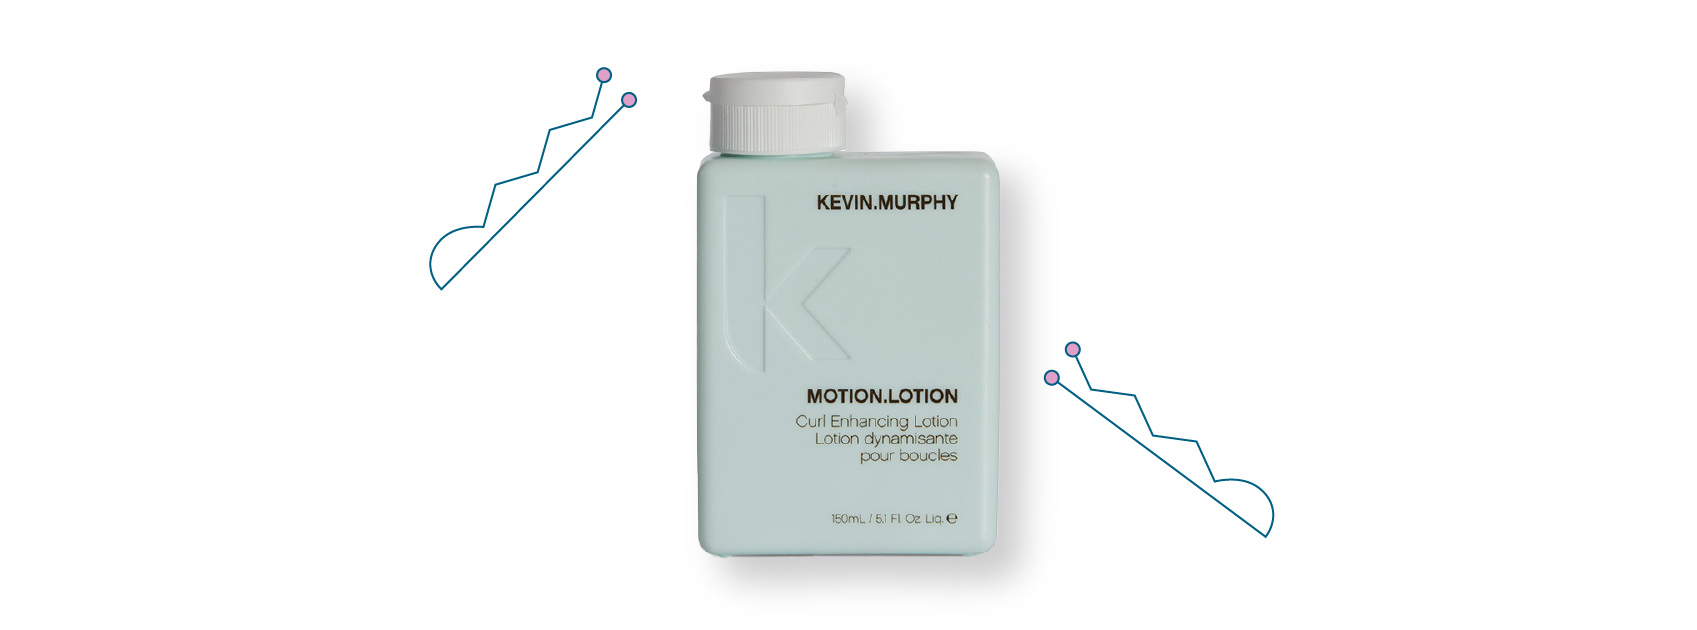 bottle of motion lotion by kevin murphy with illustrations of hair pins